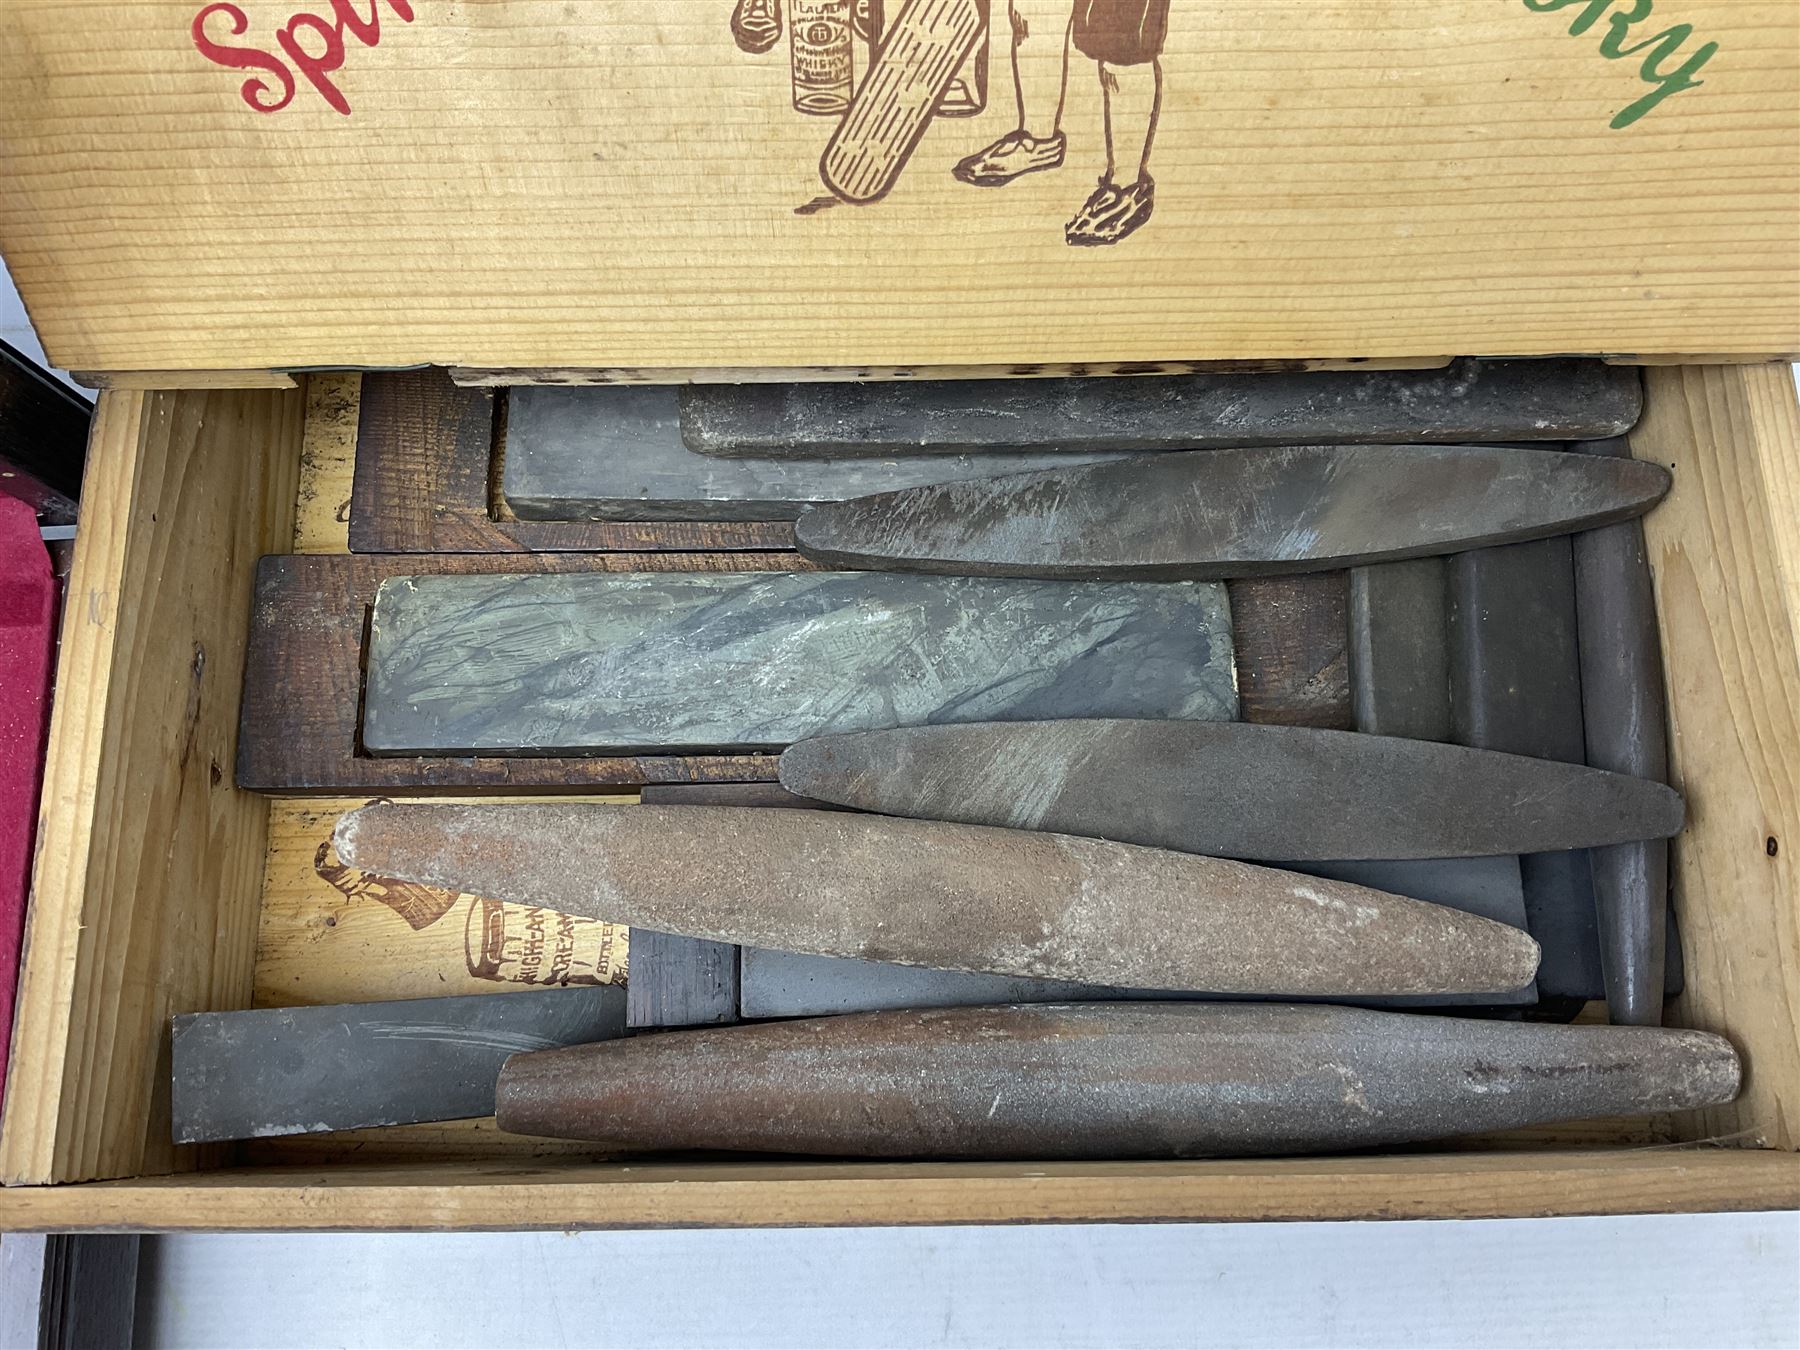 Quantity of oil and sharpening stones in wood box - Image 9 of 10